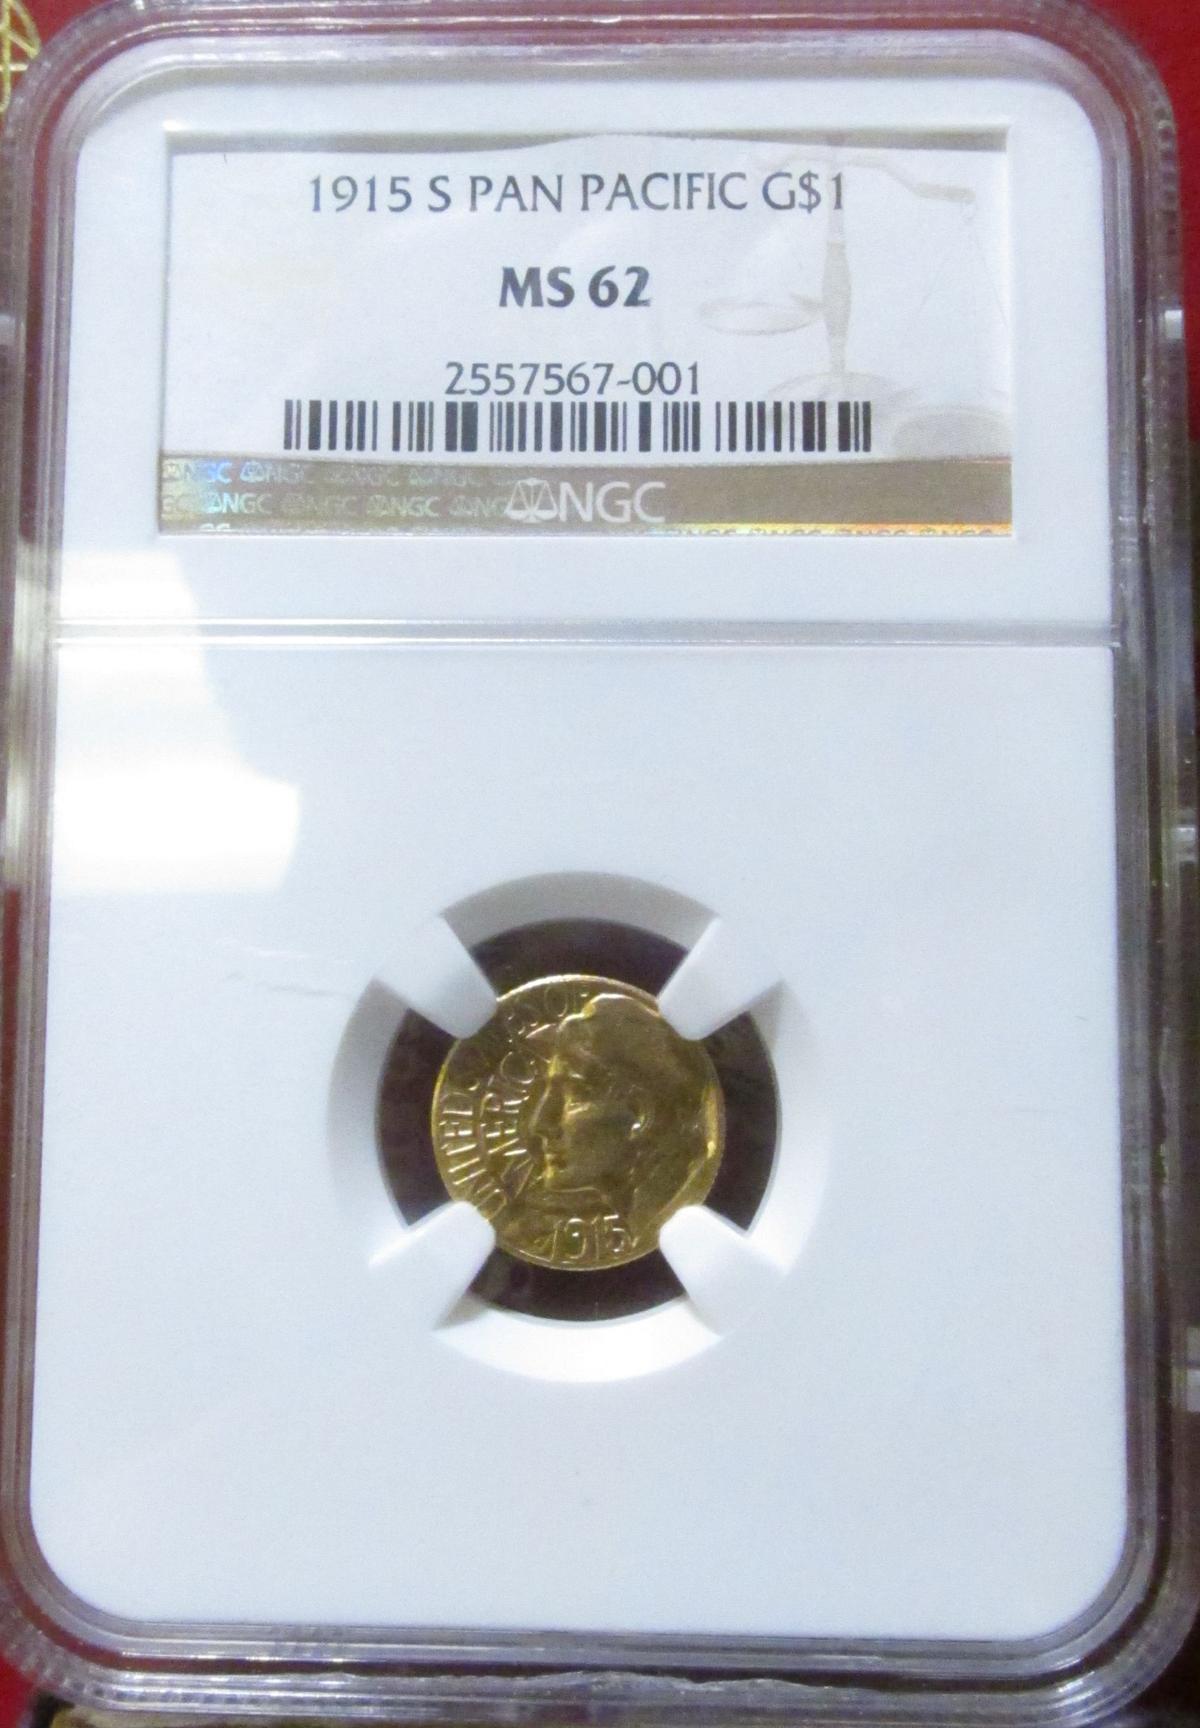 1915 S Pan-Pacific $1 Gold NGC slabbed "1915 S Pan Pacific G$1 MS 62".